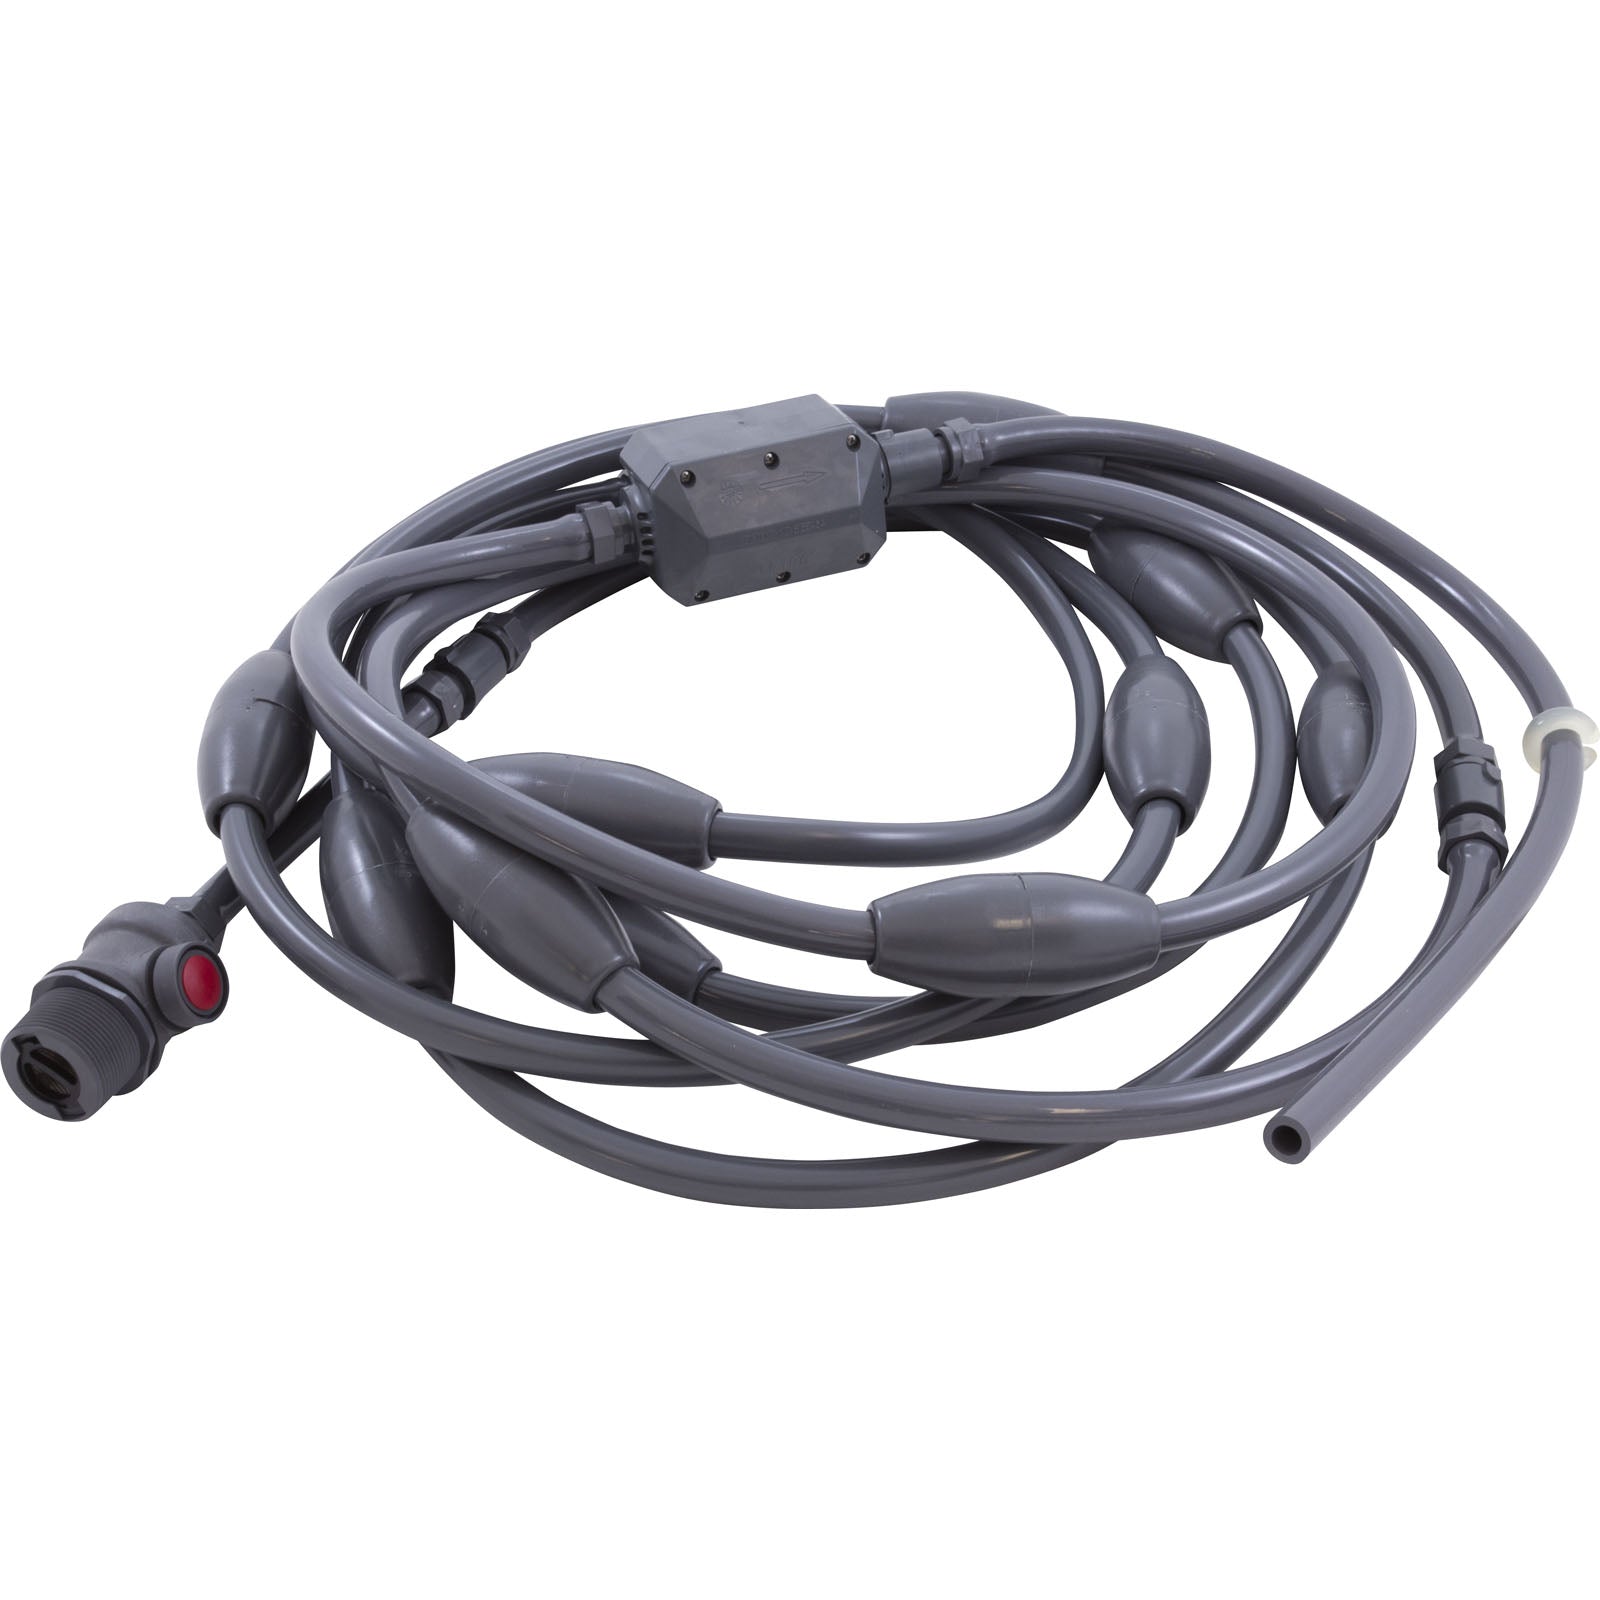 Hose Kit, Pentair Letro LL105PM Cleaner, Gray- LL209PMG